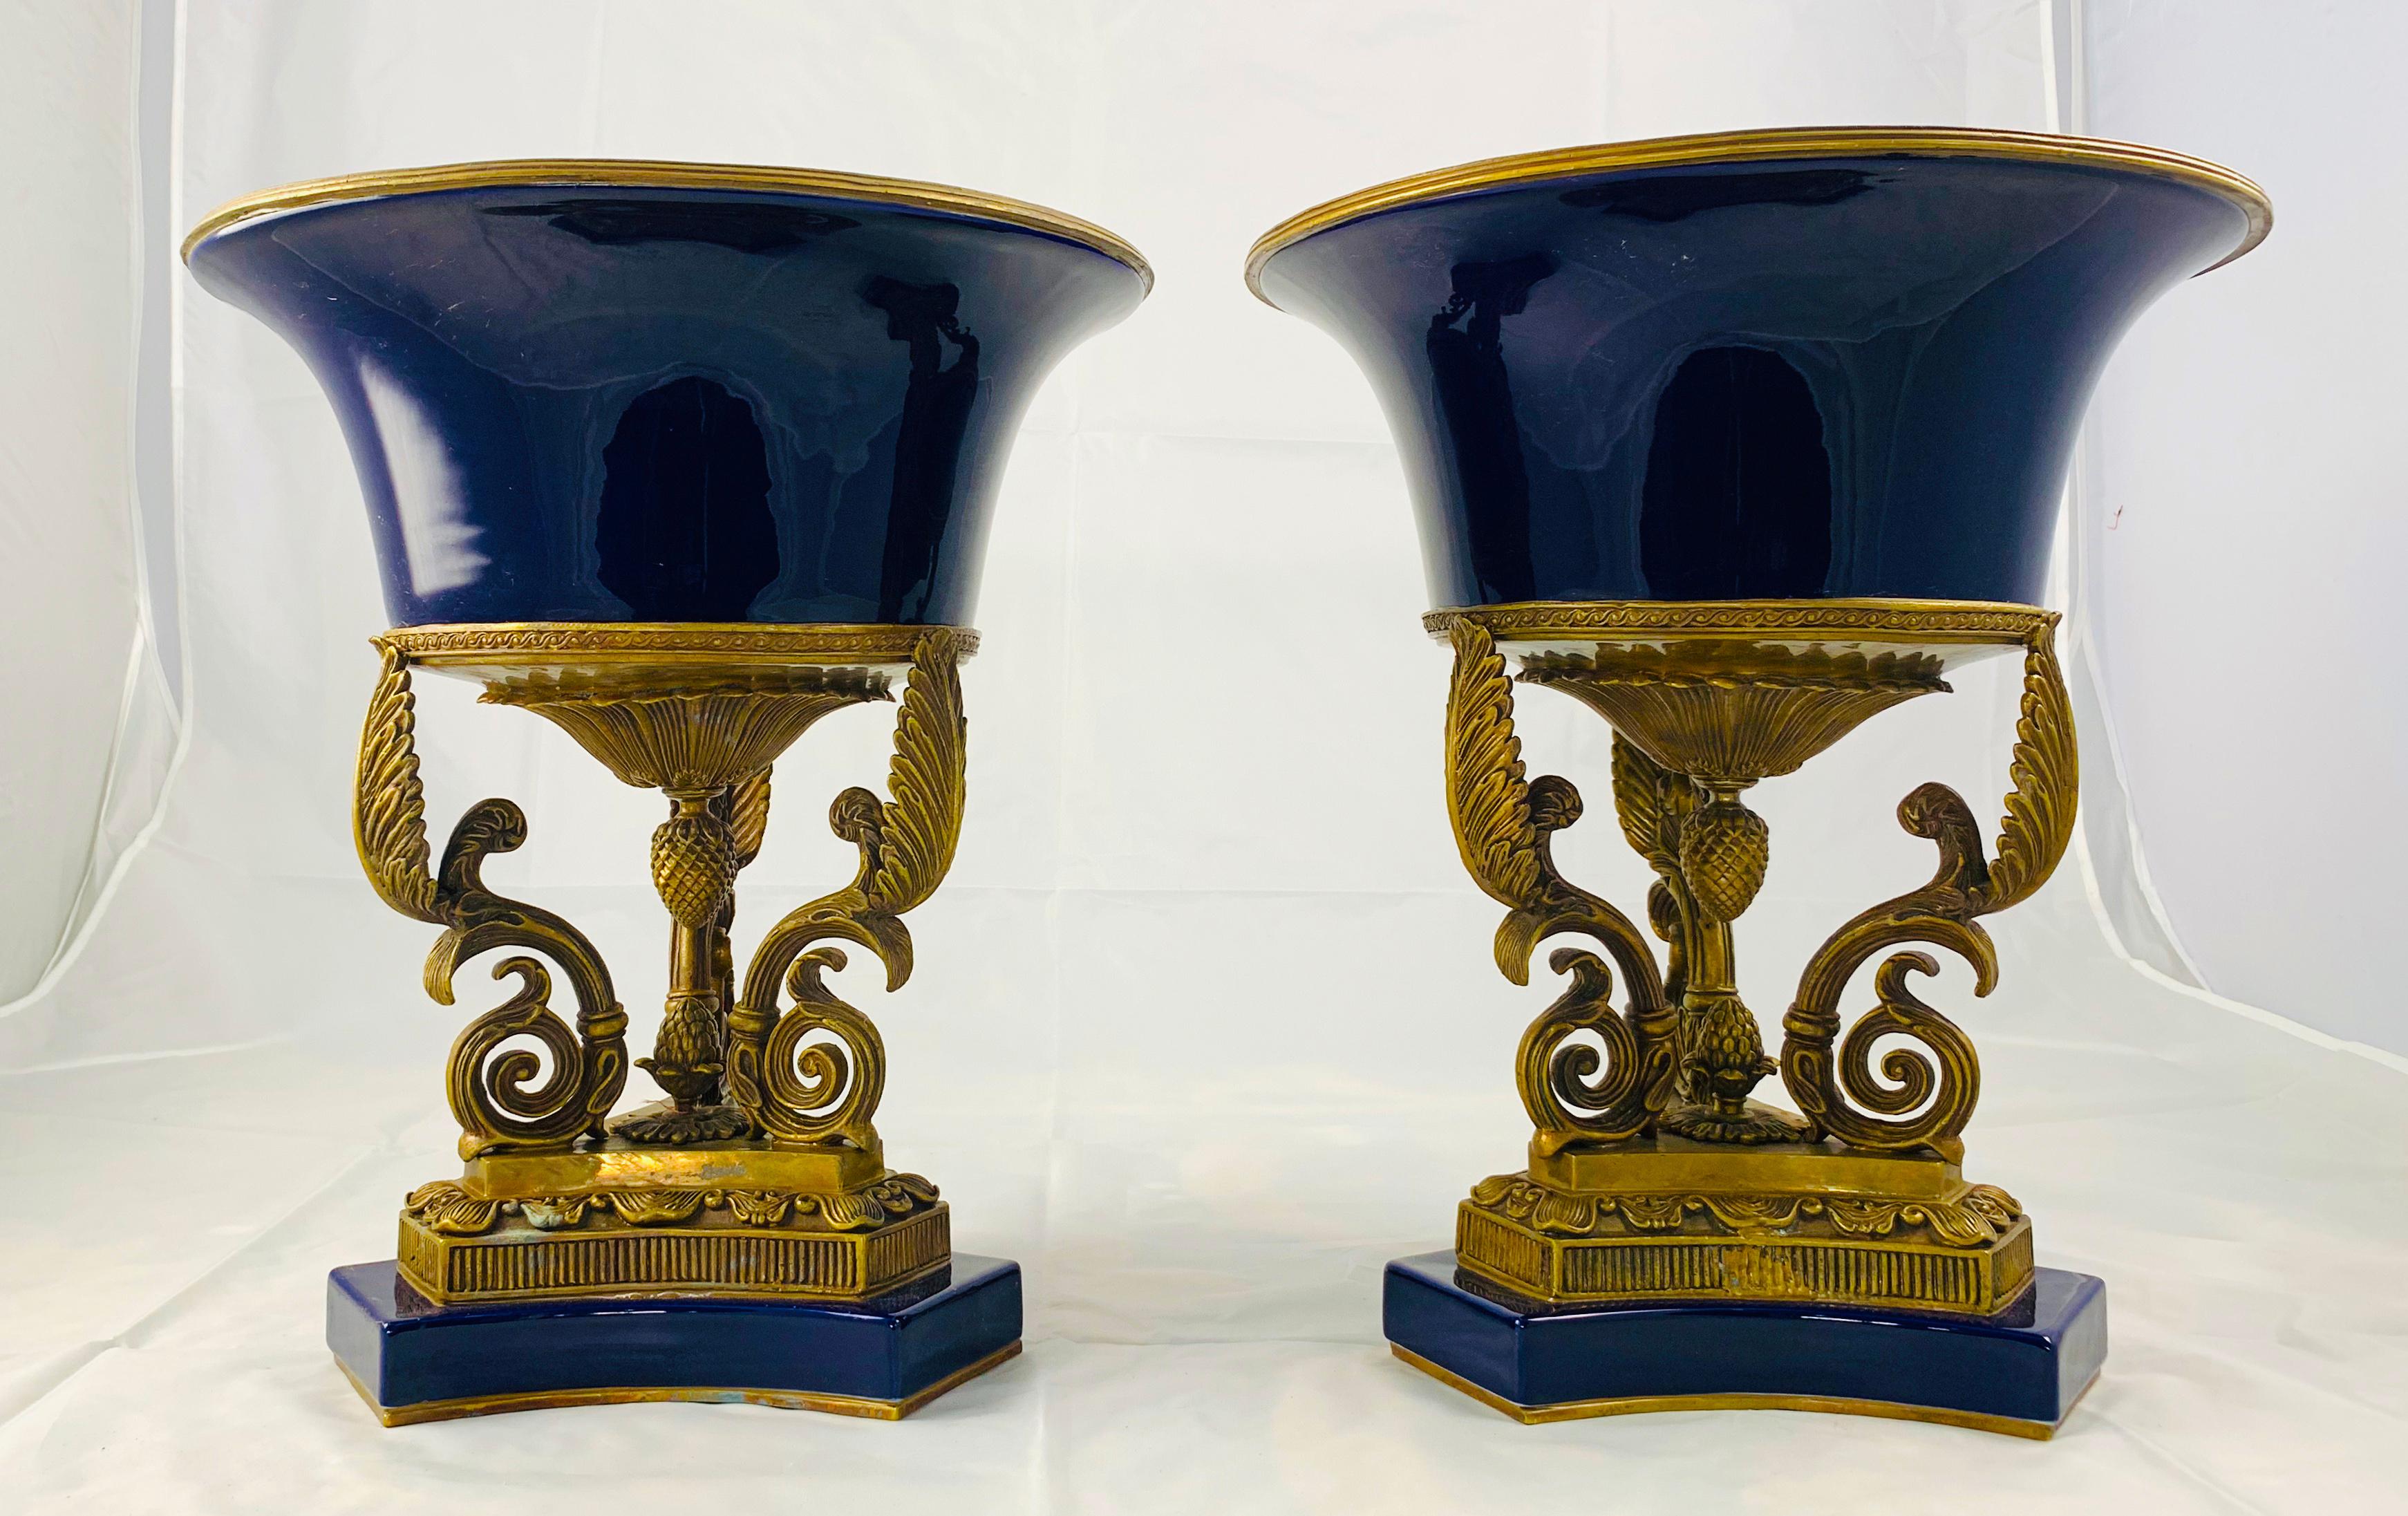 Hand-Crafted 20th Century Pair of Ormolu Mounted French Empire Bleu De Roi Porcelain Urns